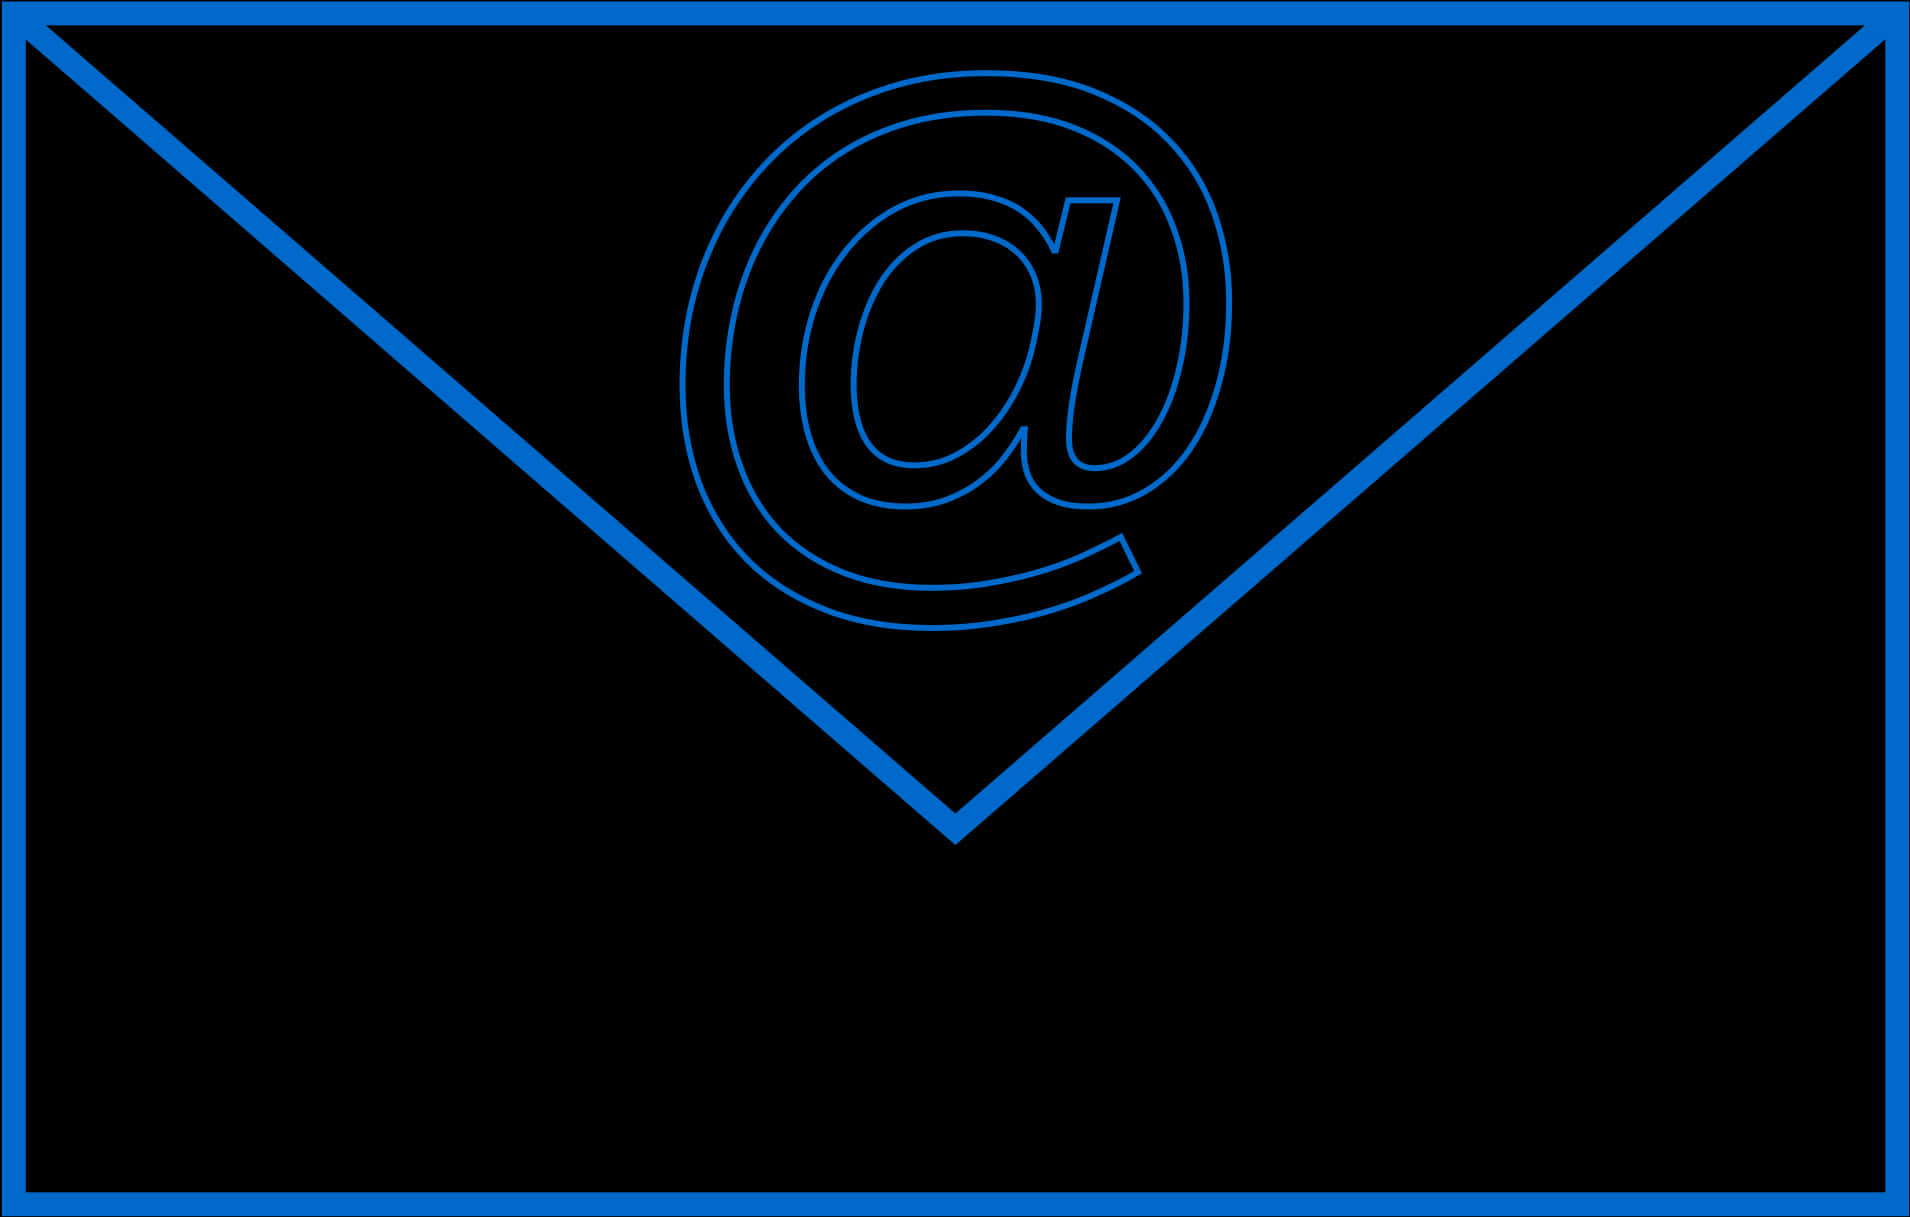 A Blue And Black Envelope With A Symbol On It